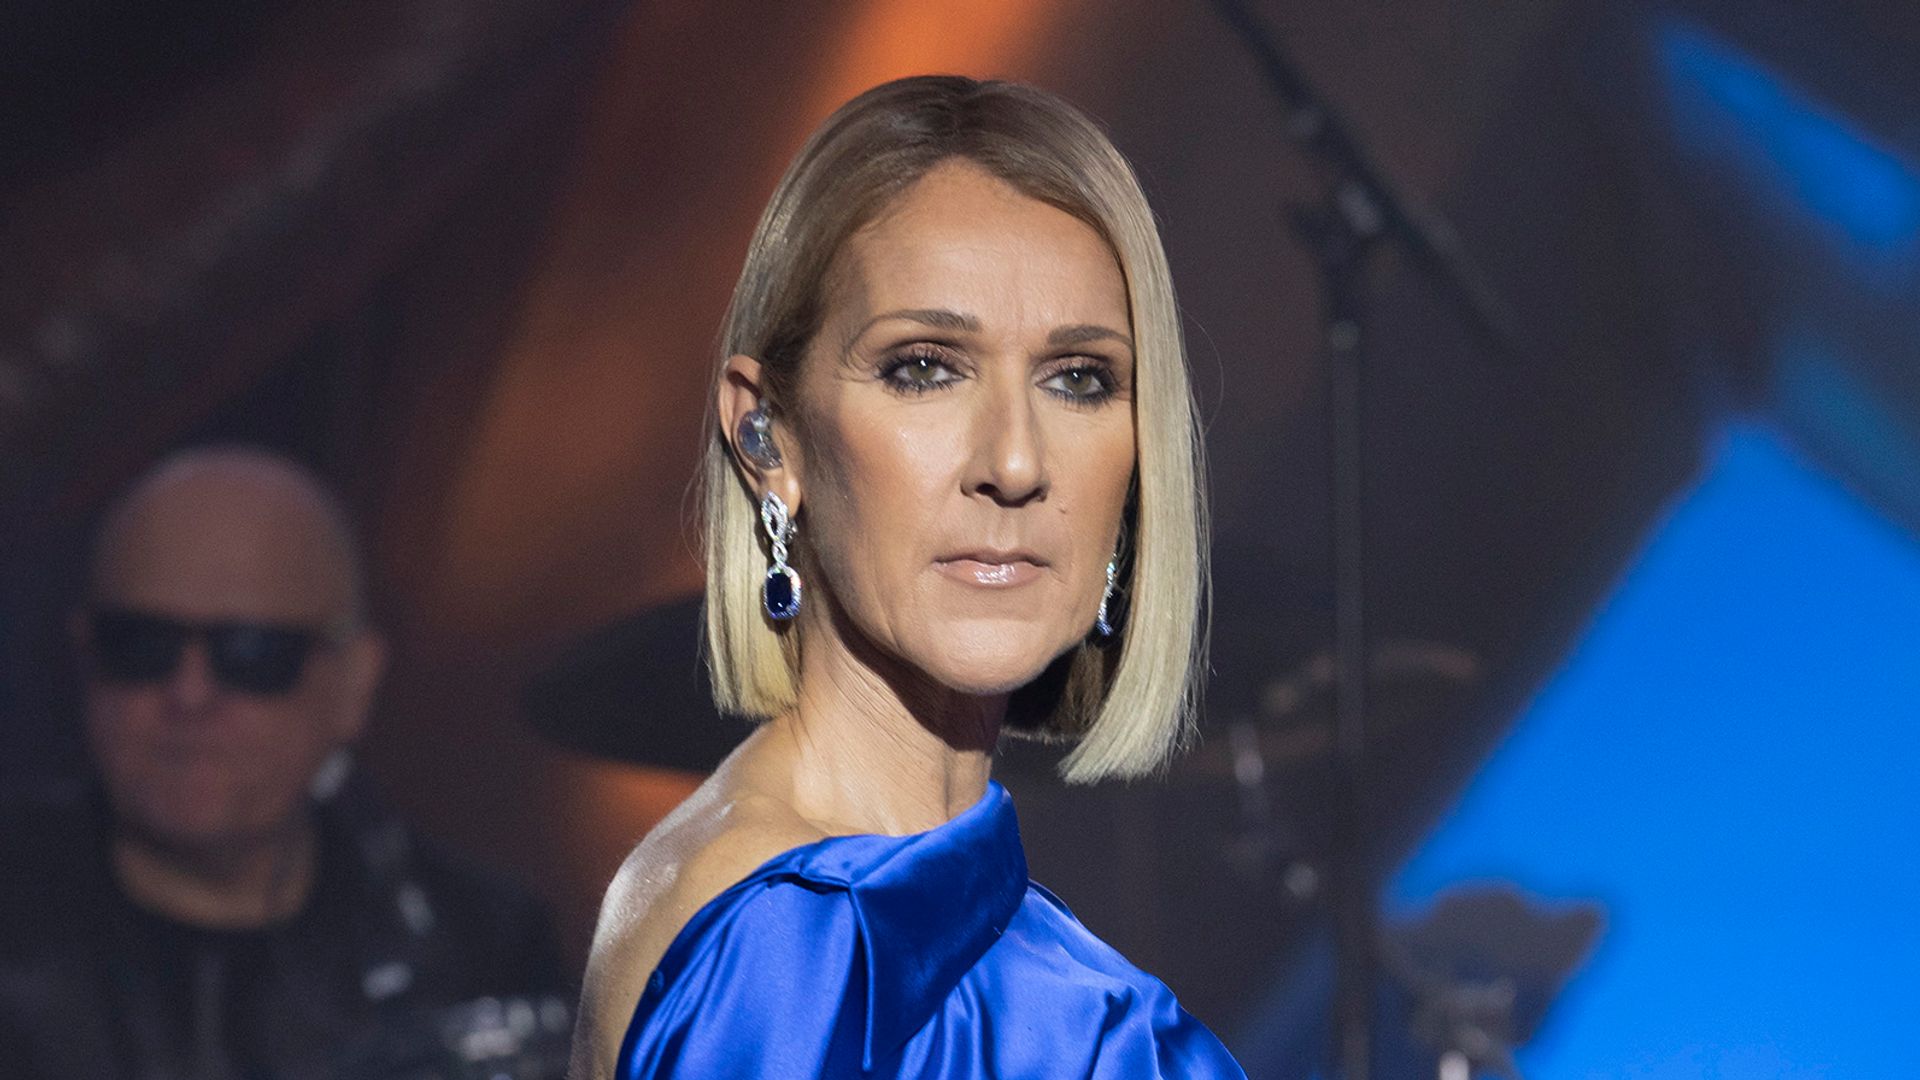 Celebrate Celine Dion's birthday with her best and most over-the